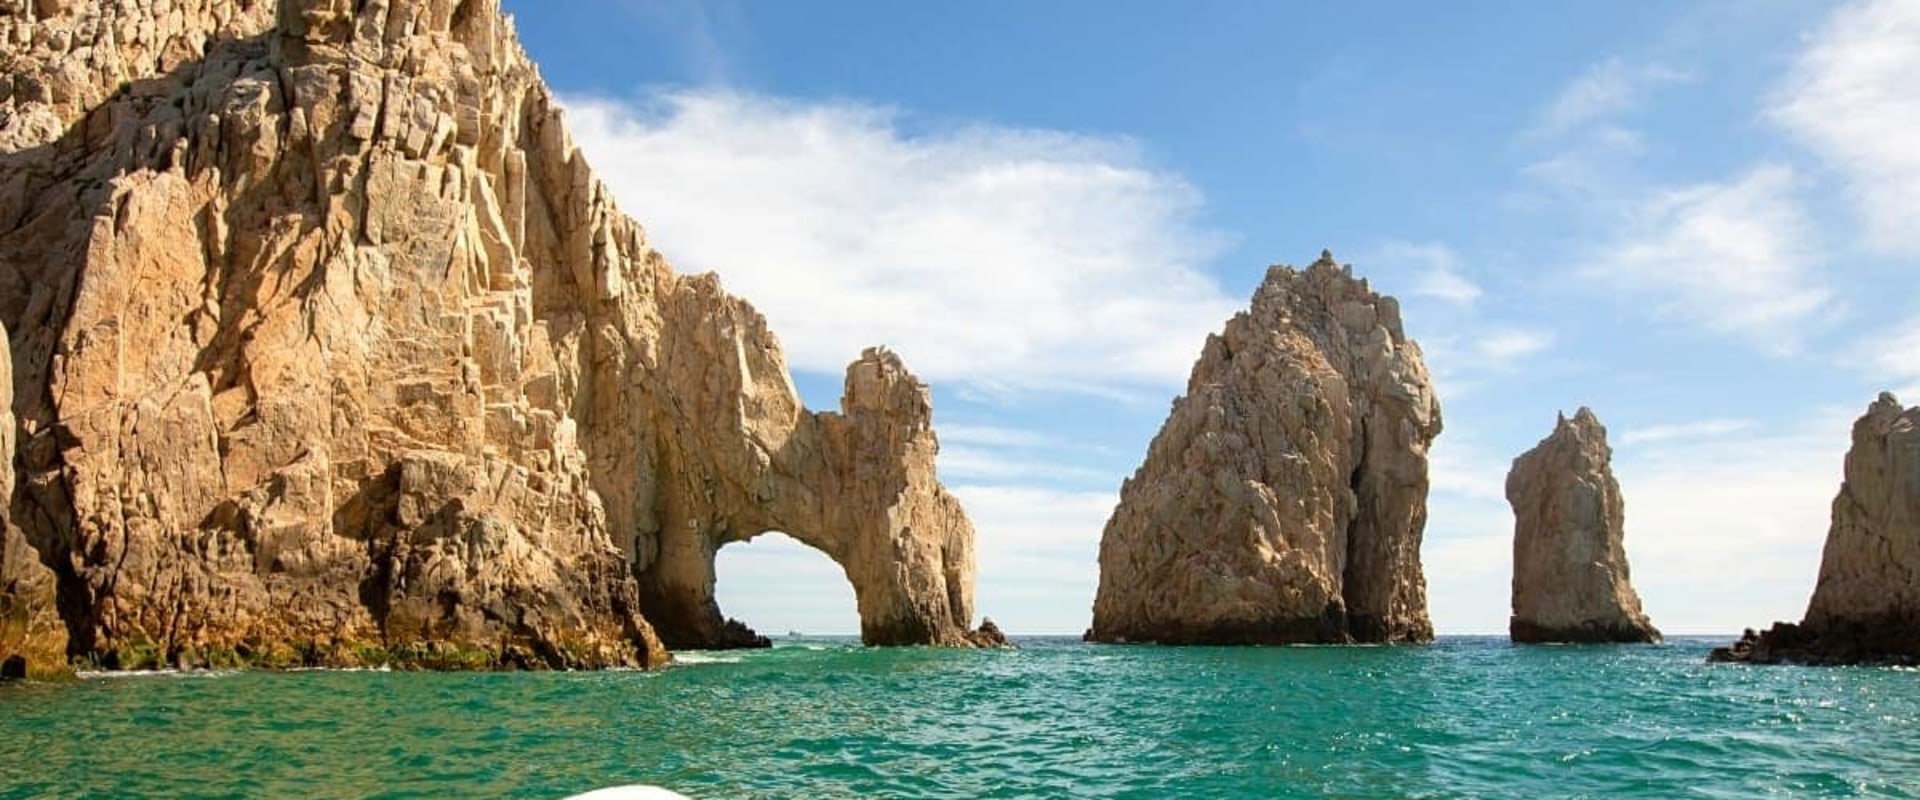 When is the Best Time to Buy Tickets for Cabo San Lucas?